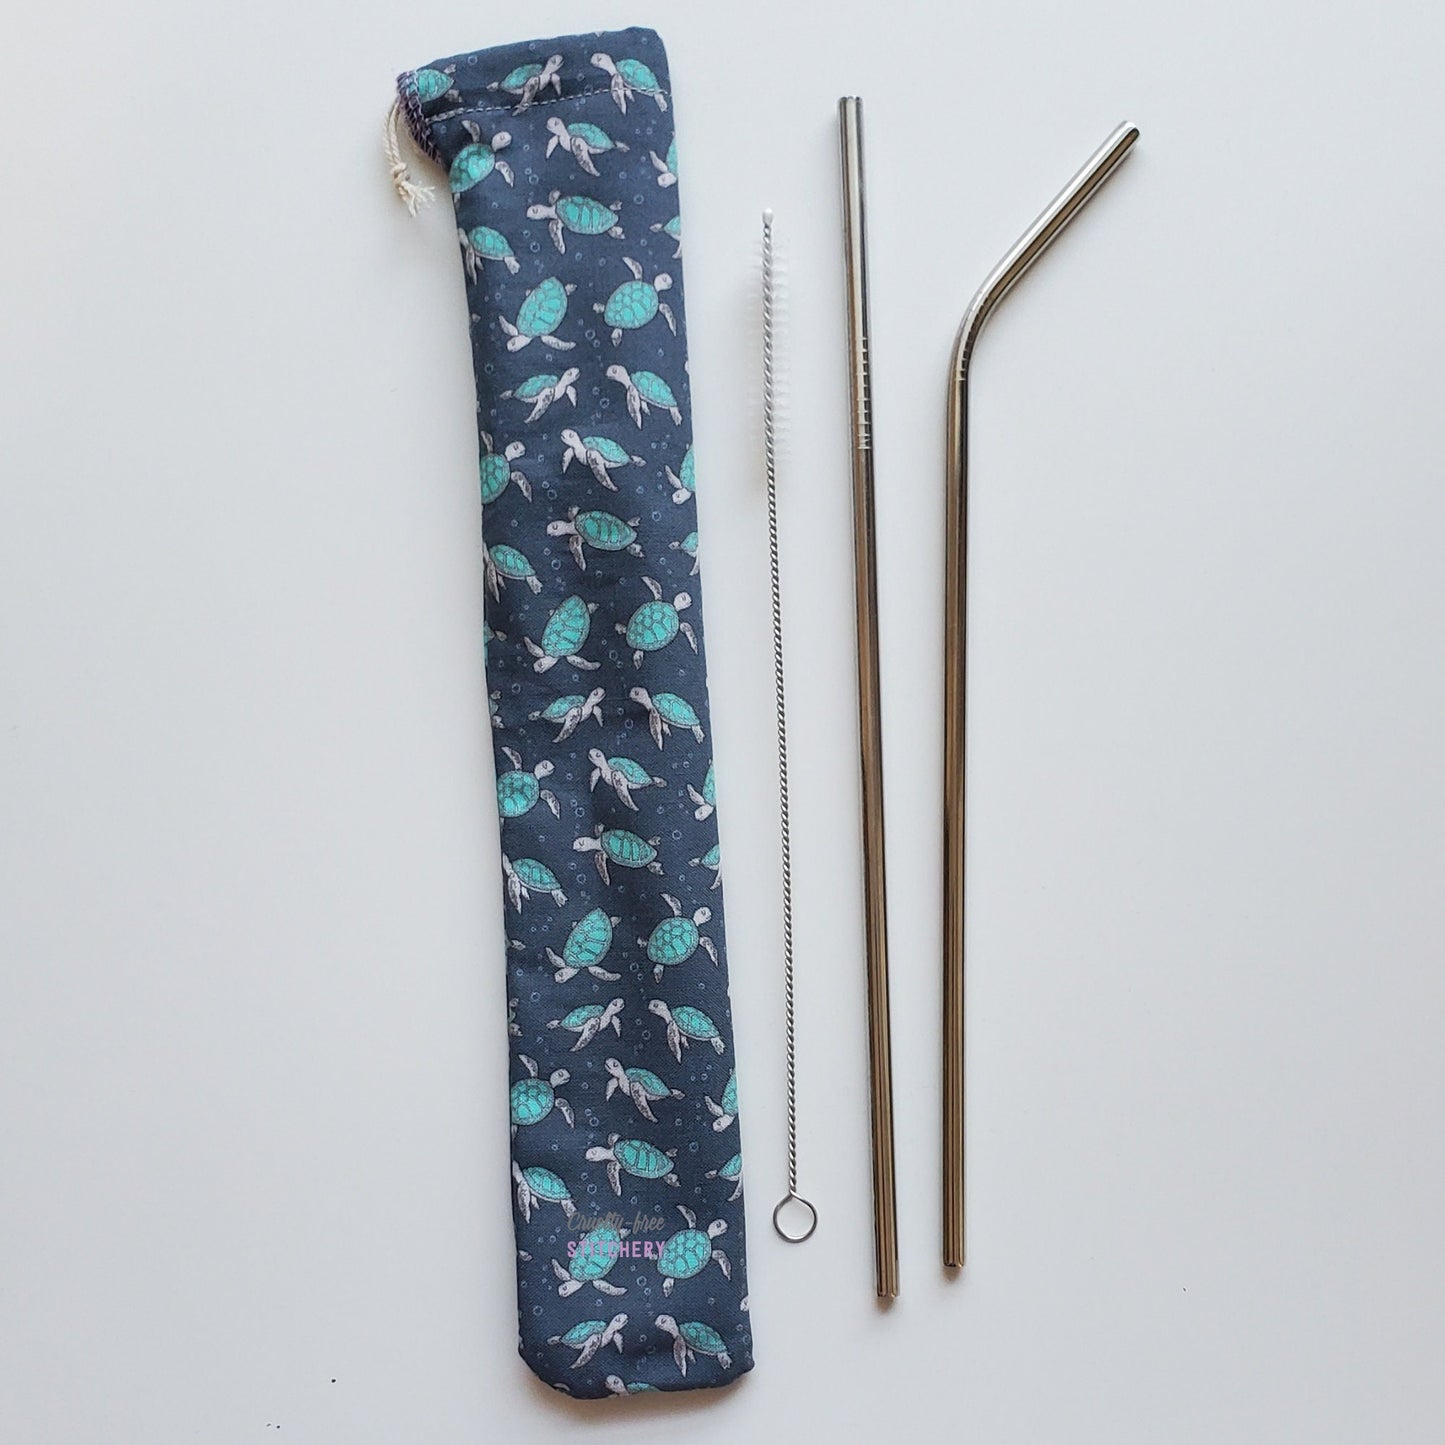 Reusable straw pouch in the same turtle print laying vertically next to a straw cleaner brush, a straight stainless steel straw, and a bent stainless steel straw.